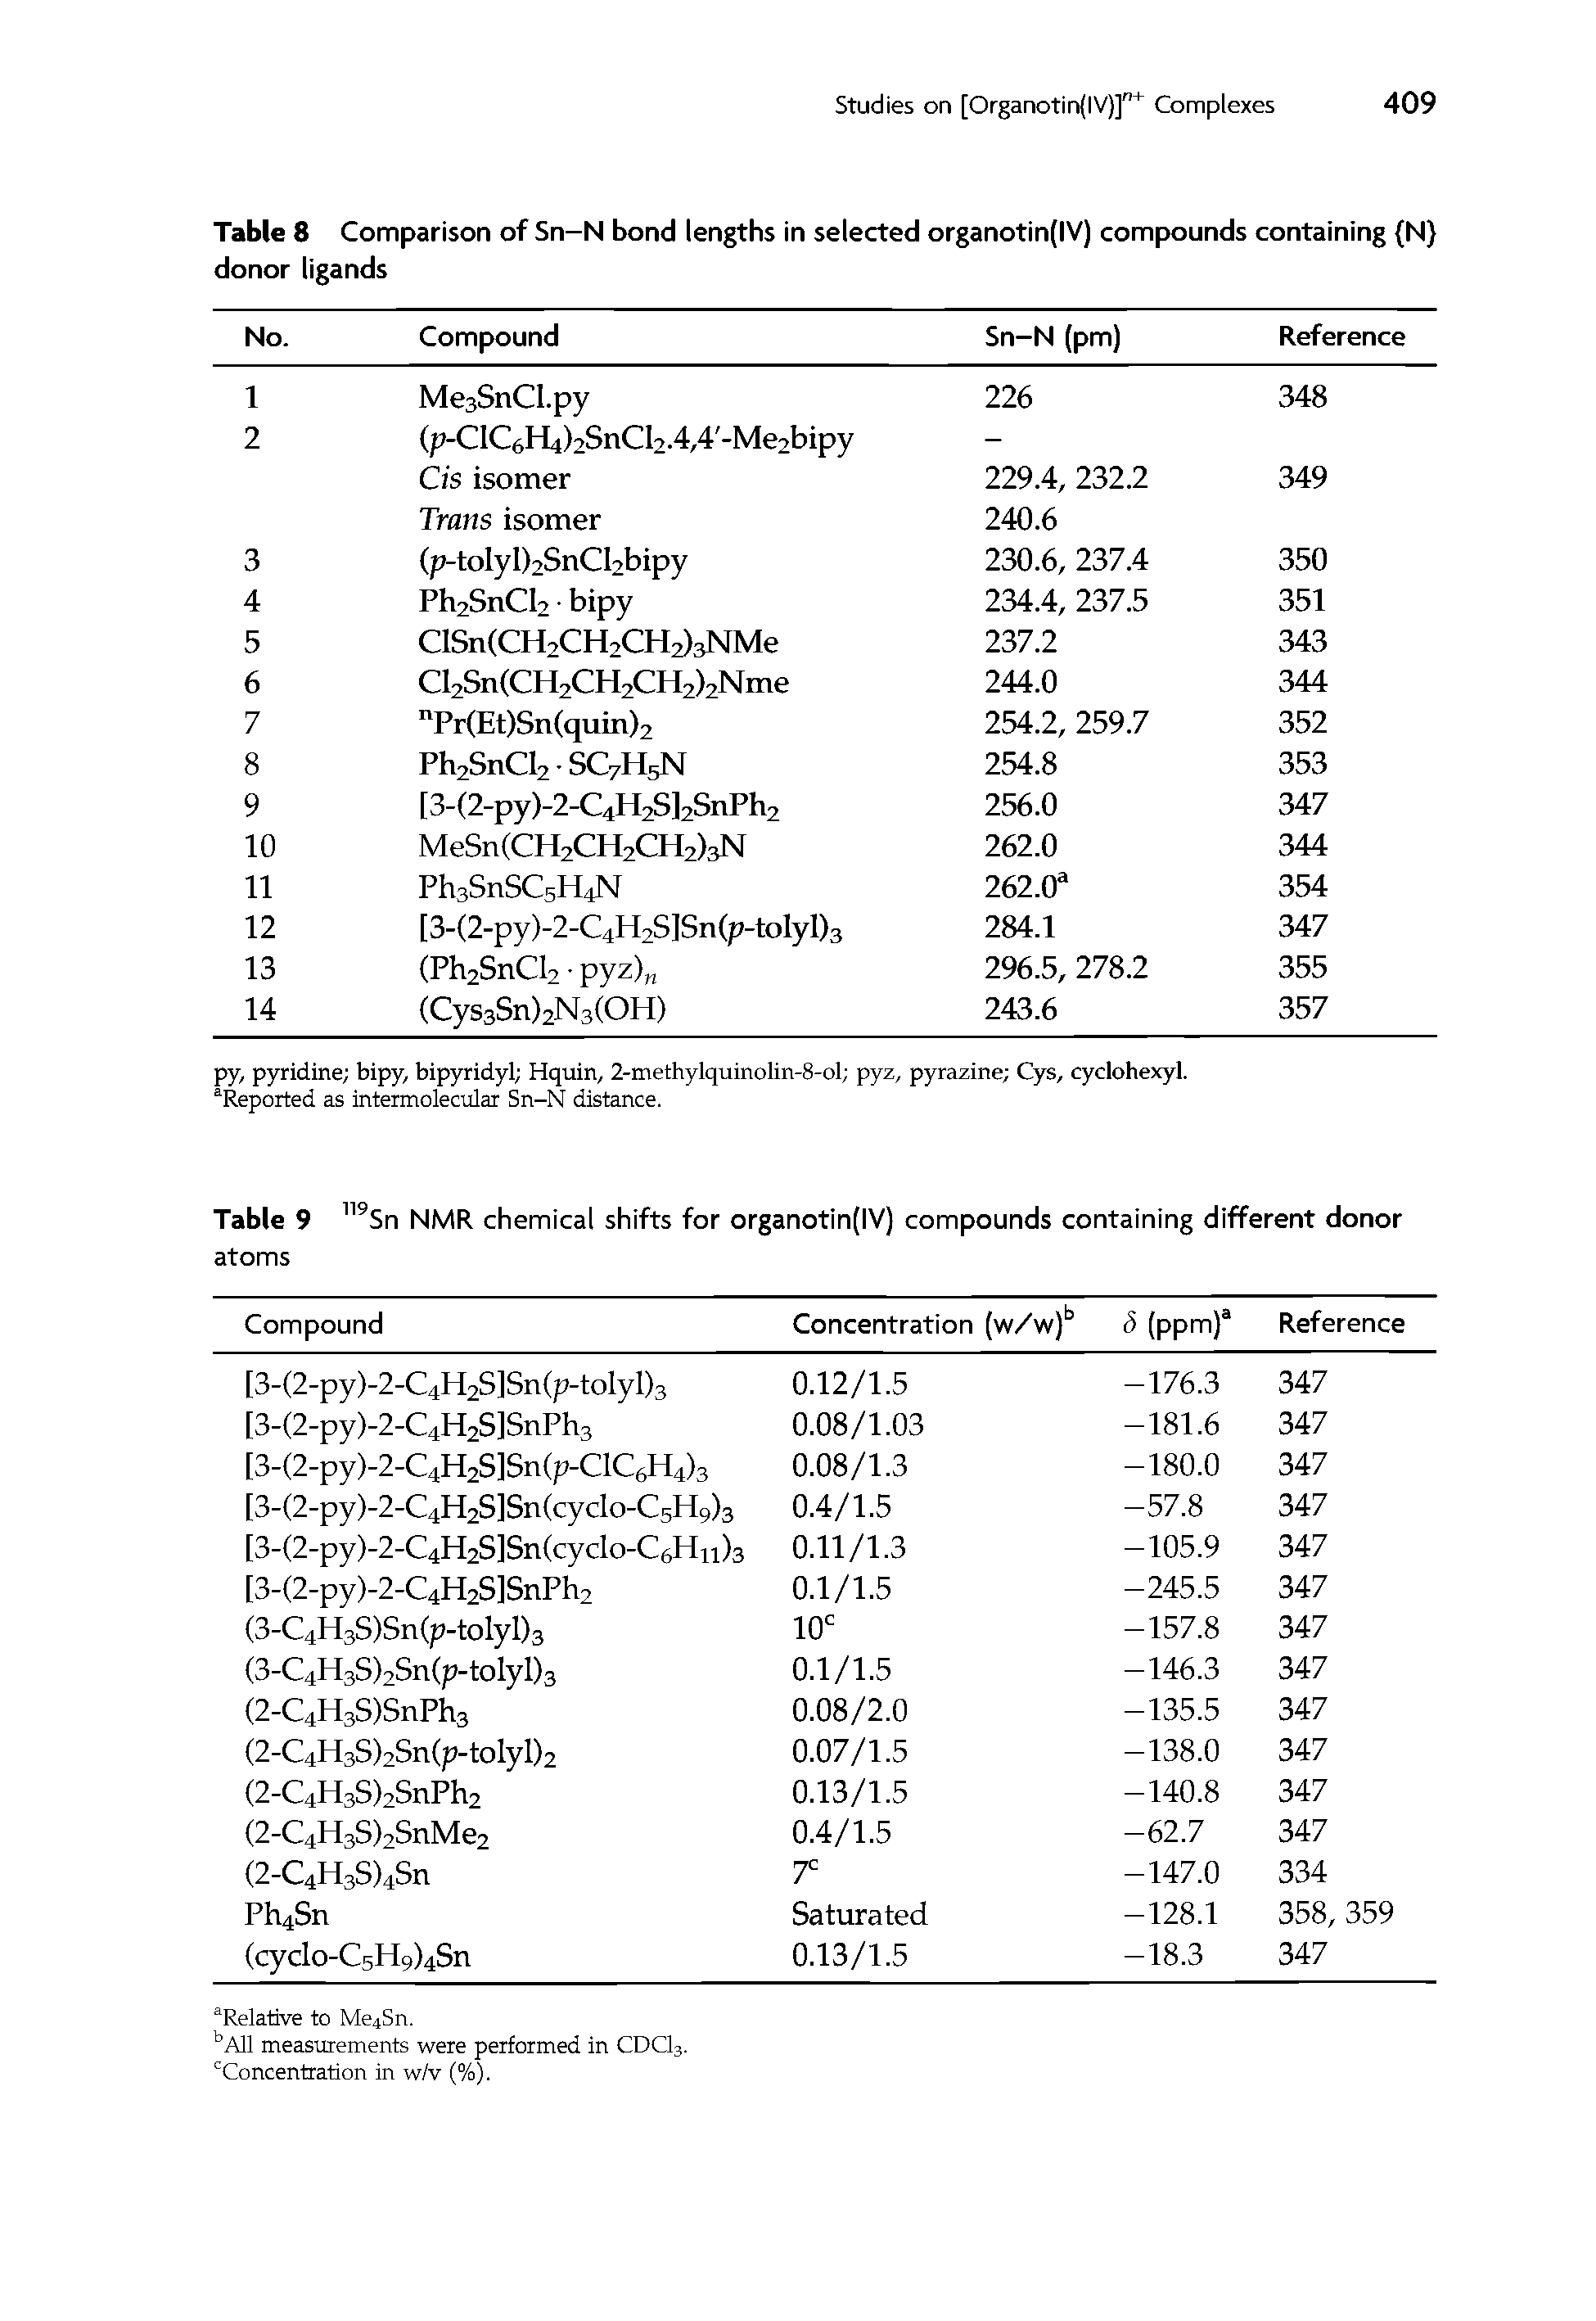 Table 8 Comparison of Sn-N bond lengths in selected organotin(IV) compounds containing N) donor ligands...